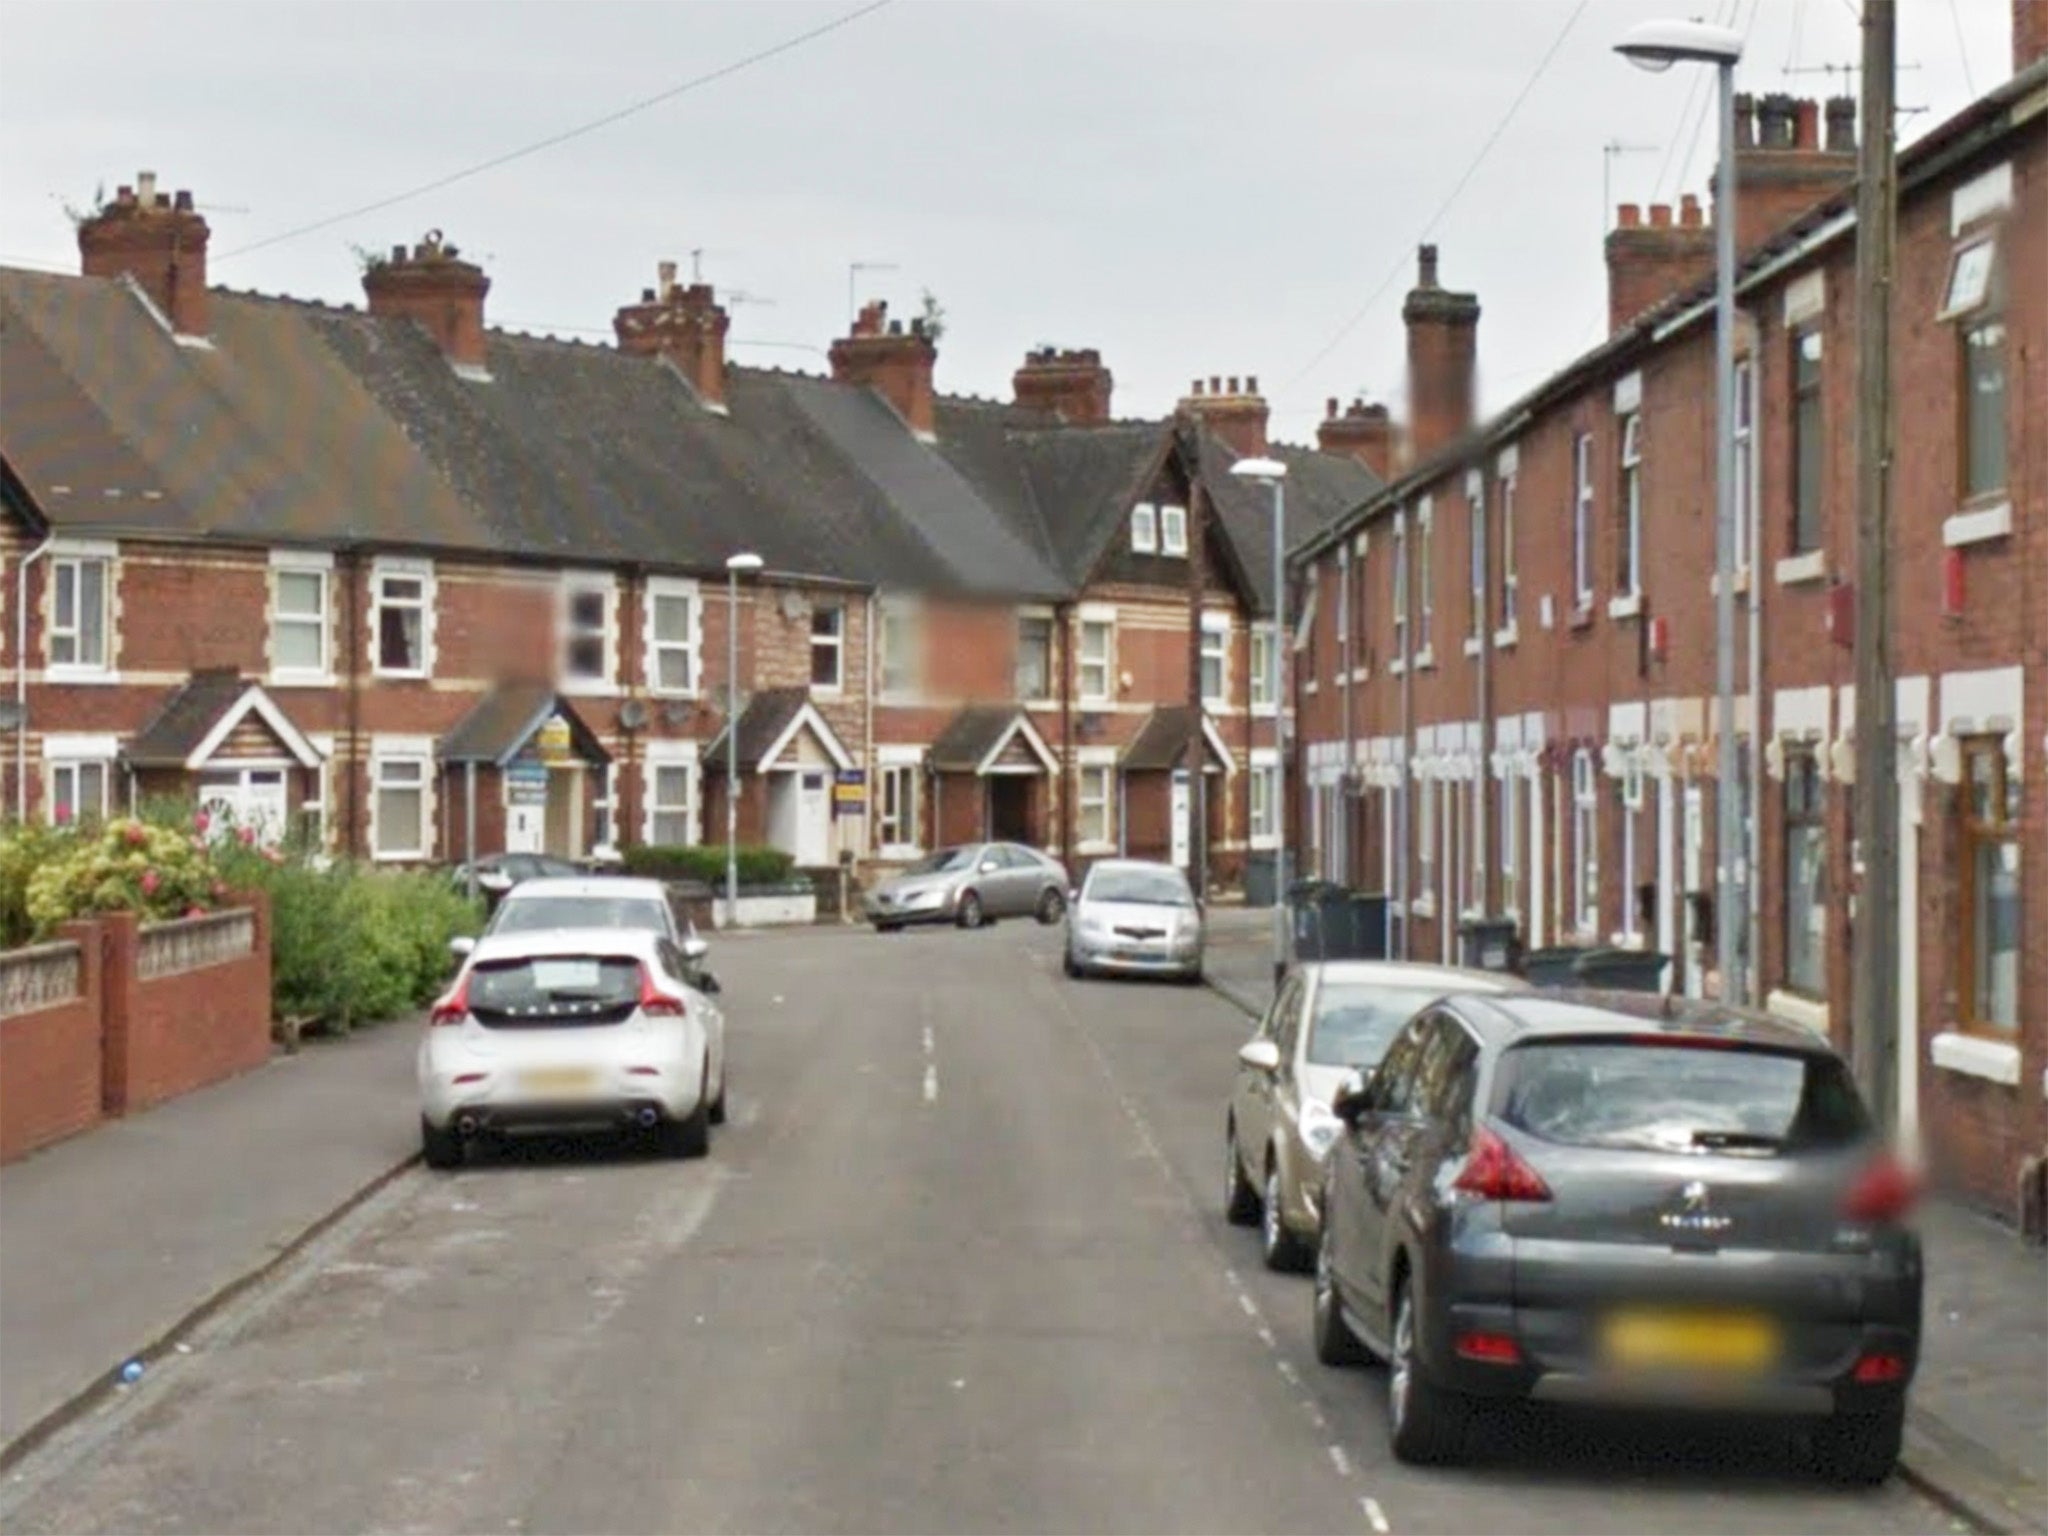 A 49-year-old woman was arrested on suspicion of murder after officers found the two children with “significant” injuries at a home in Stoke-on-Trent